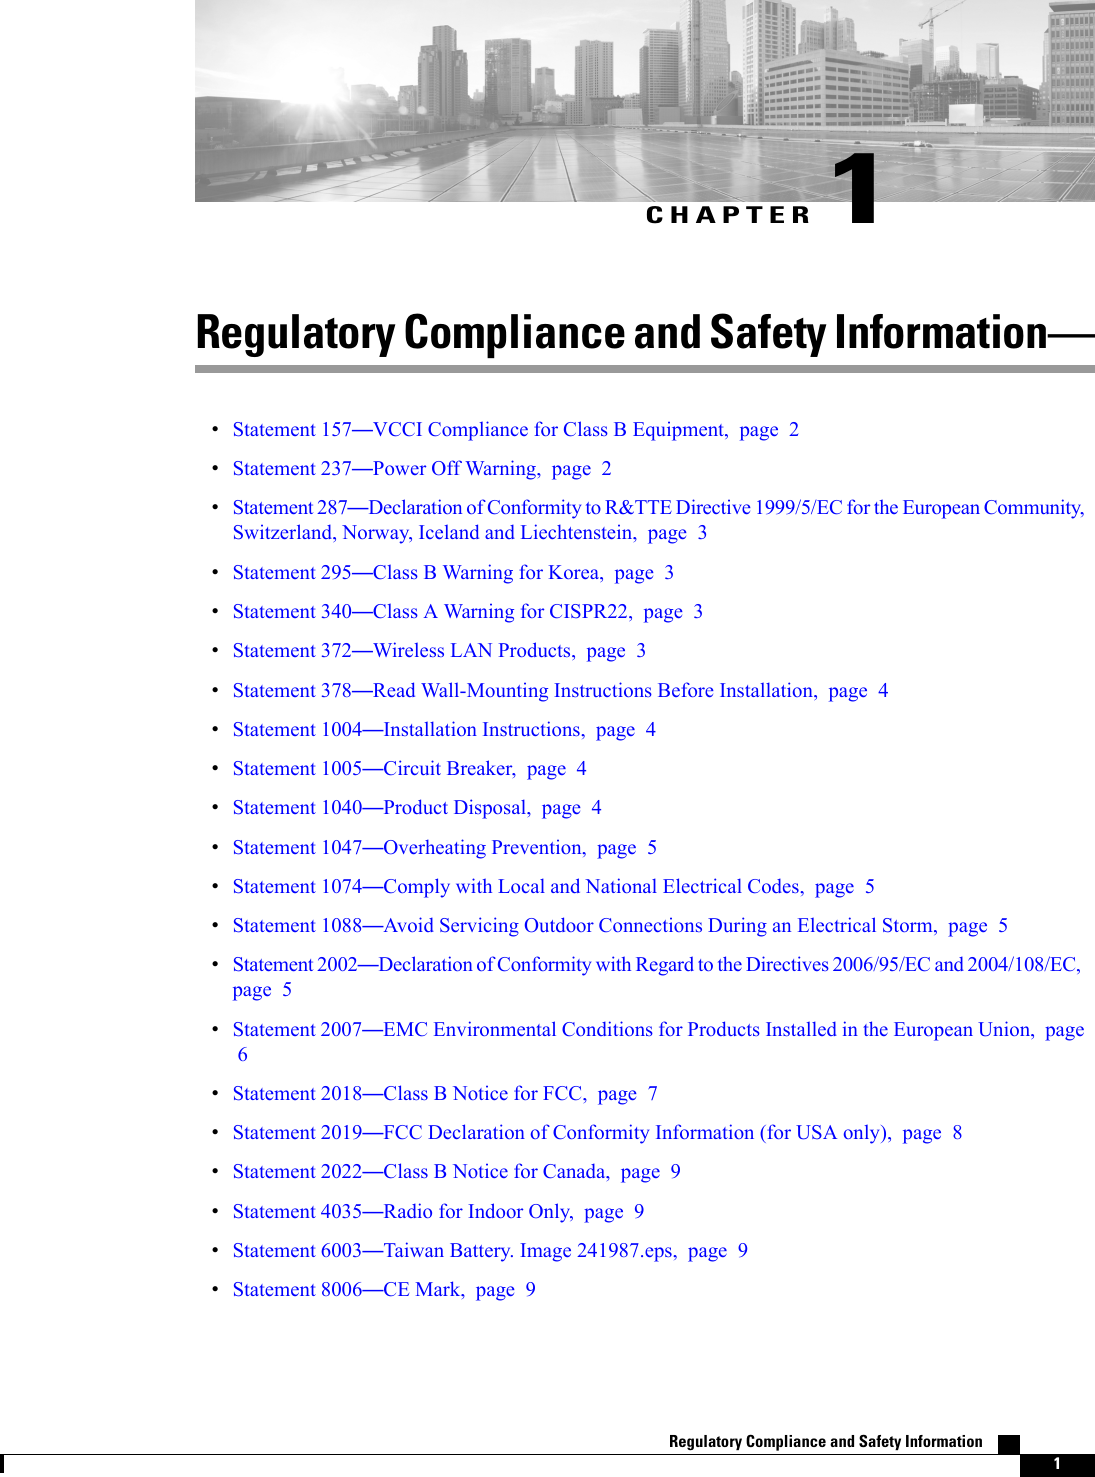 CHAPTER 1Regulatory Compliance and Safety InformationStatement 157VCCI Compliance for Class B Equipment, page 2Statement 237Power Off Warning, page 2Statement 287Declaration of Conformity to R&amp;TTE Directive 1999/5/EC for the European Community,Switzerland, Norway, Iceland and Liechtenstein, page 3Statement 295Class B Warning for Korea, page 3Statement 340Class A Warning for CISPR22, page 3Statement 372Wireless LAN Products, page 3Statement 378Read Wall-Mounting Instructions Before Installation, page 4Statement 1004Installation Instructions, page 4Statement 1005Circuit Breaker, page 4Statement 1040Product Disposal, page 4Statement 1047Overheating Prevention, page 5Statement 1074Comply with Local and National Electrical Codes, page 5Statement 1088Avoid Servicing Outdoor Connections During an Electrical Storm, page 5Statement 2002Declaration of Conformity with Regard to the Directives 2006/95/EC and 2004/108/EC,page 5Statement 2007EMC Environmental Conditions for Products Installed in the European Union, page6Statement 2018Class B Notice for FCC, page 7Statement 2019FCC Declaration of Conformity Information (for USA only), page 8Statement 2022Class B Notice for Canada, page 9Statement 4035Radio for Indoor Only, page 9Statement 6003Taiwan Battery. Image 241987.eps, page 9Statement 8006CE Mark, page 9Regulatory Compliance and Safety Information    1